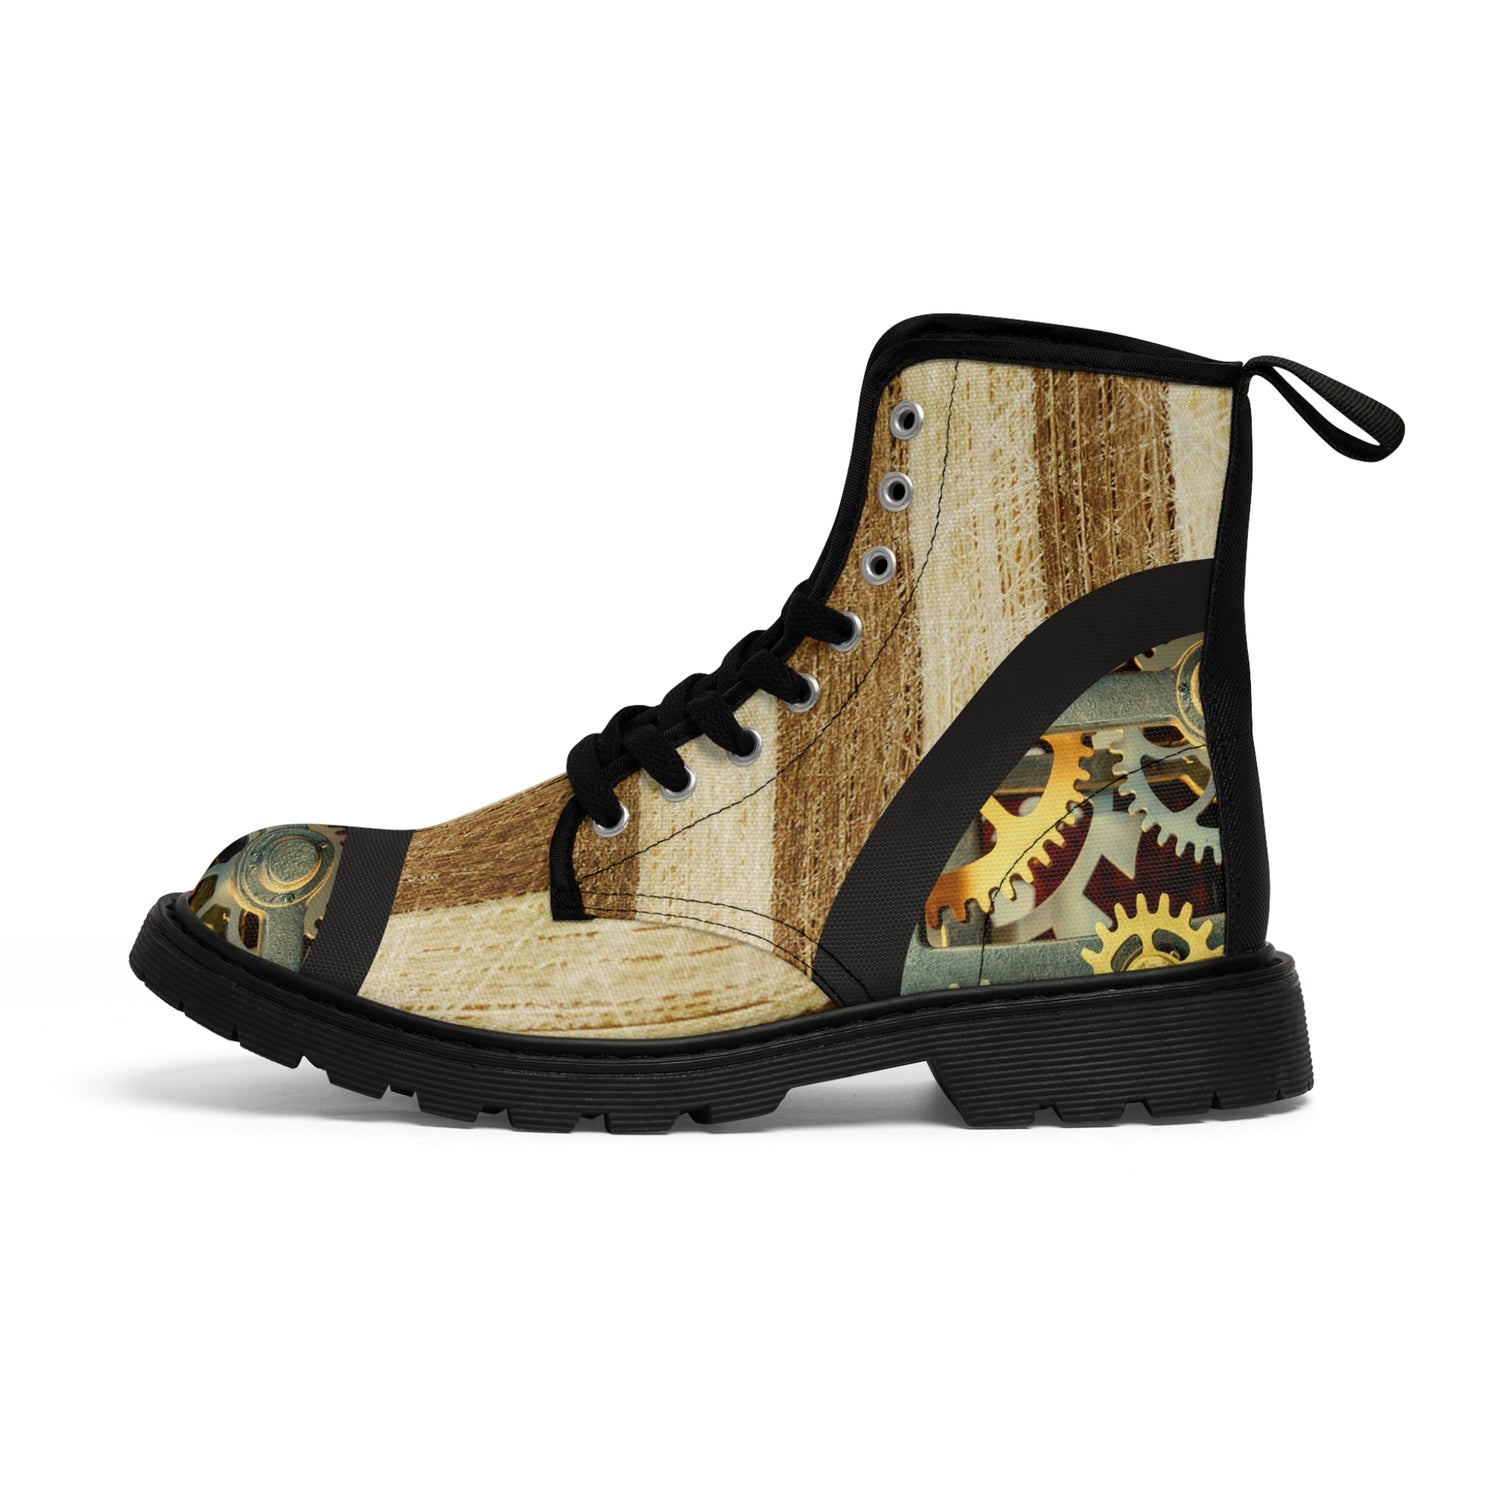 Men's Steampunk Gear Canvas Boots Lord and Lady Towers